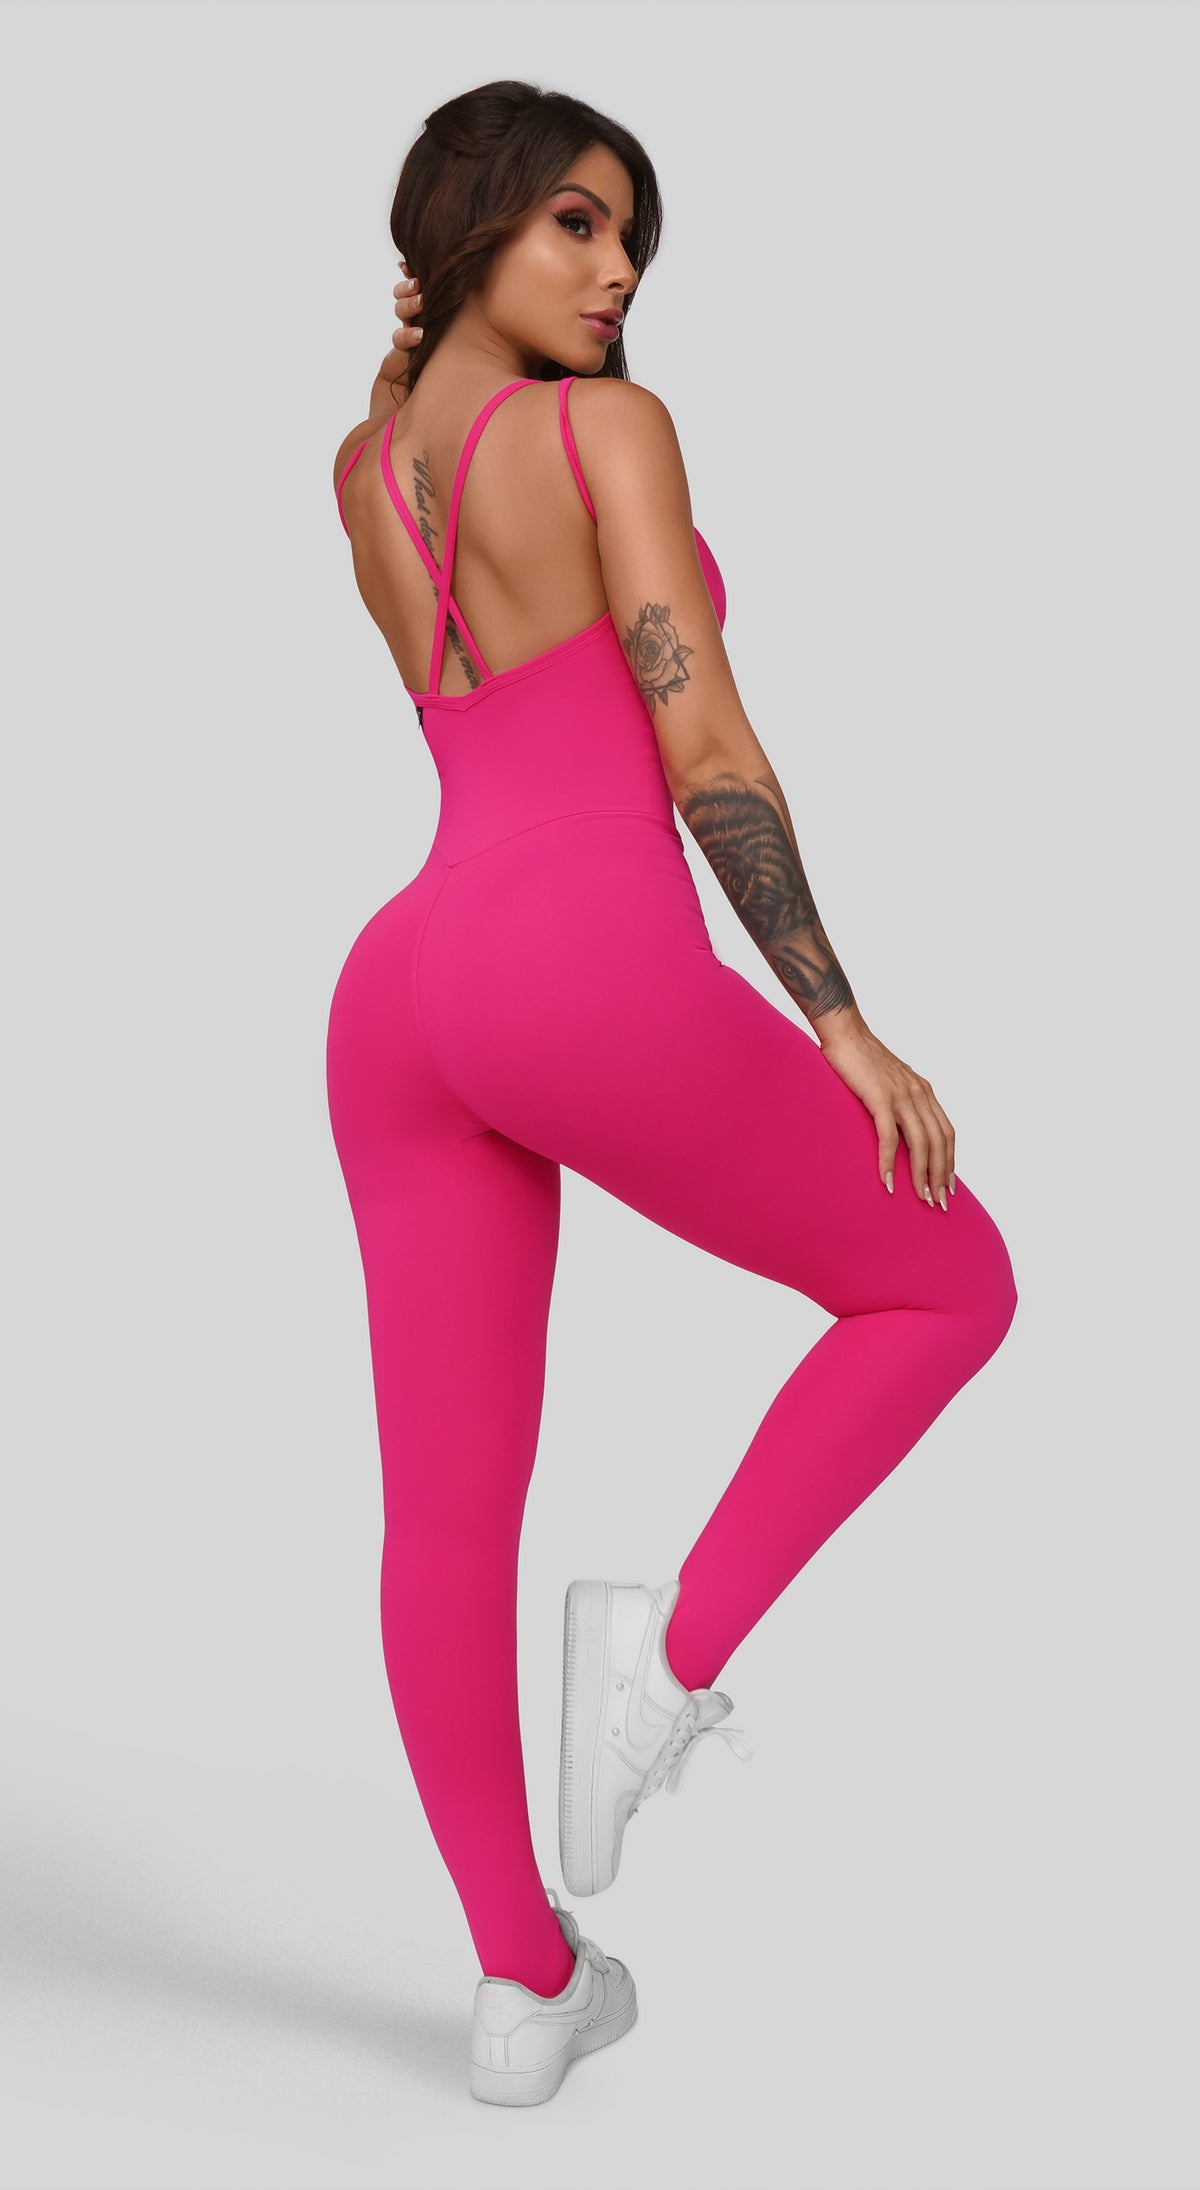 Jumpsuit One Piece/Rompers Archives - Best Fit by Brazil - Let's Gym  Fitness - Dynamite Brazil Leggings USA - Alo Yoga Leggings Sexy Workout  Clothes - Superhot Leggings - LaBellaMafia Clothes